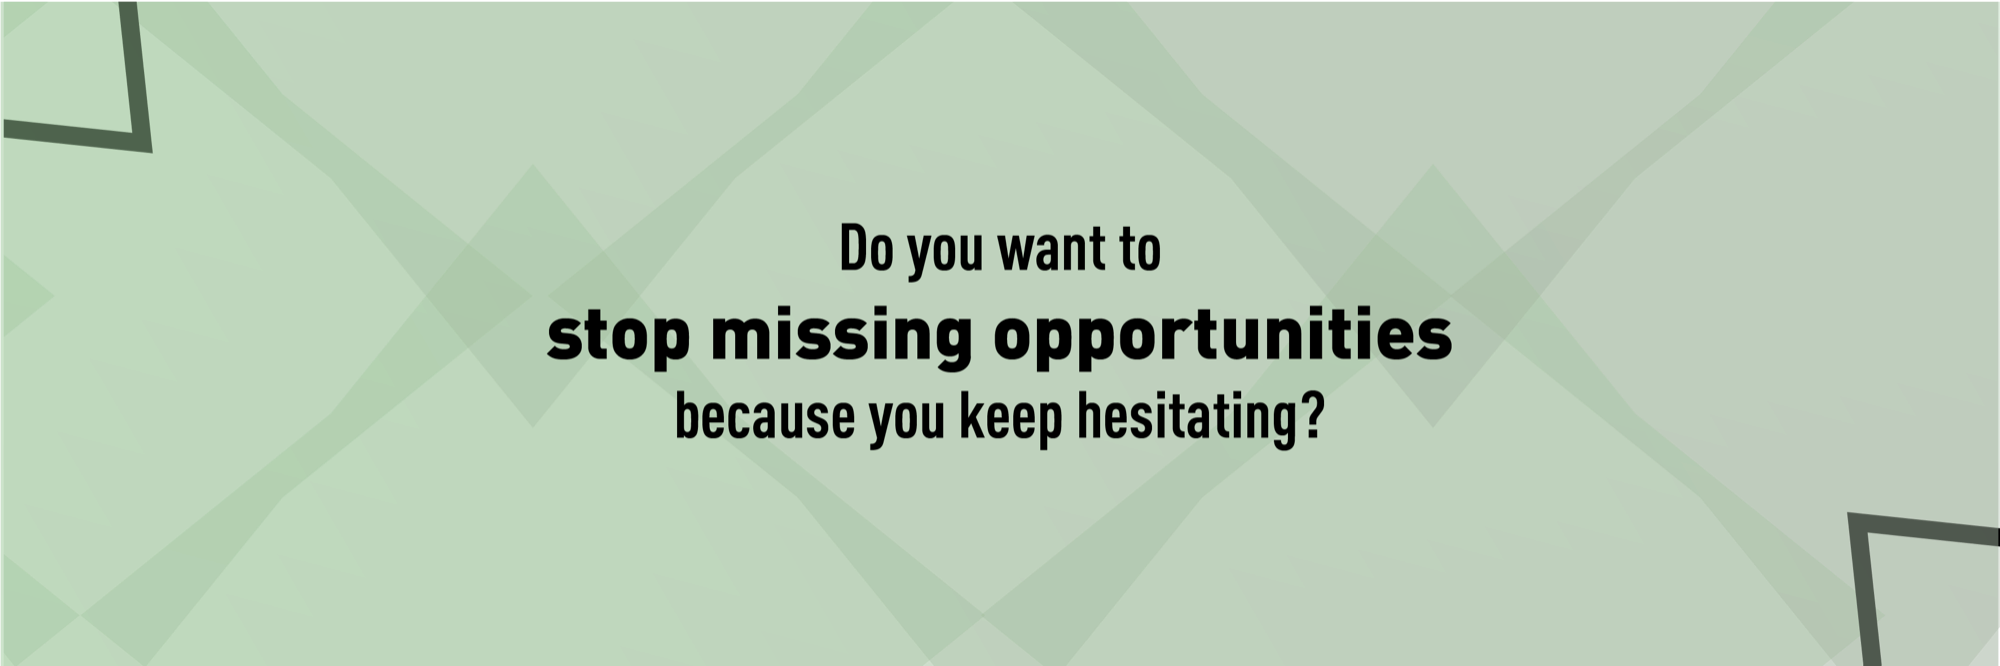 Do you want to stop missing opportunities because you keep hesitating?